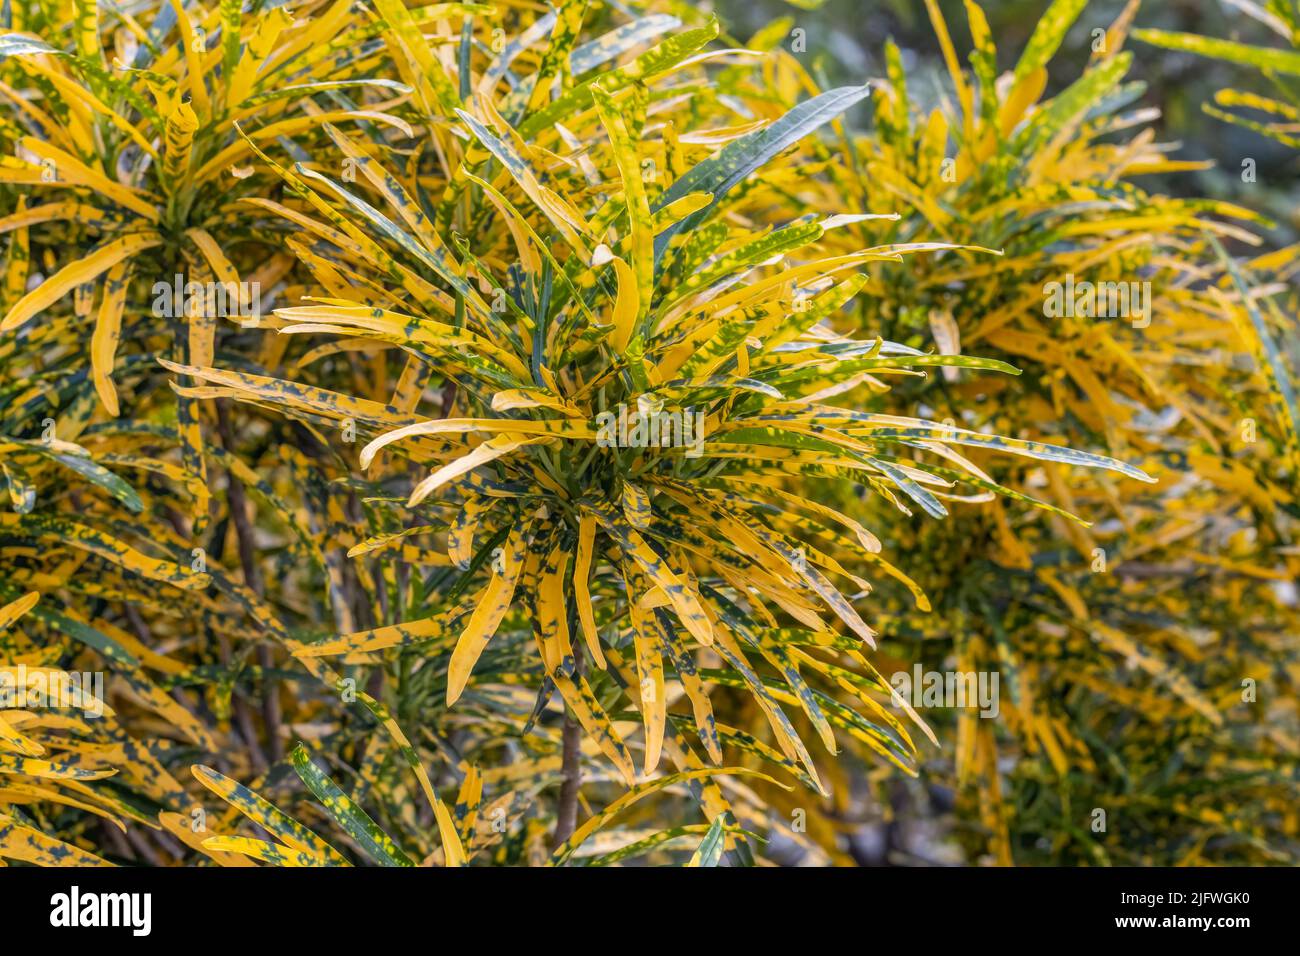 Yellow and green spotted decorative plant with branches close up in the garden Stock Photo